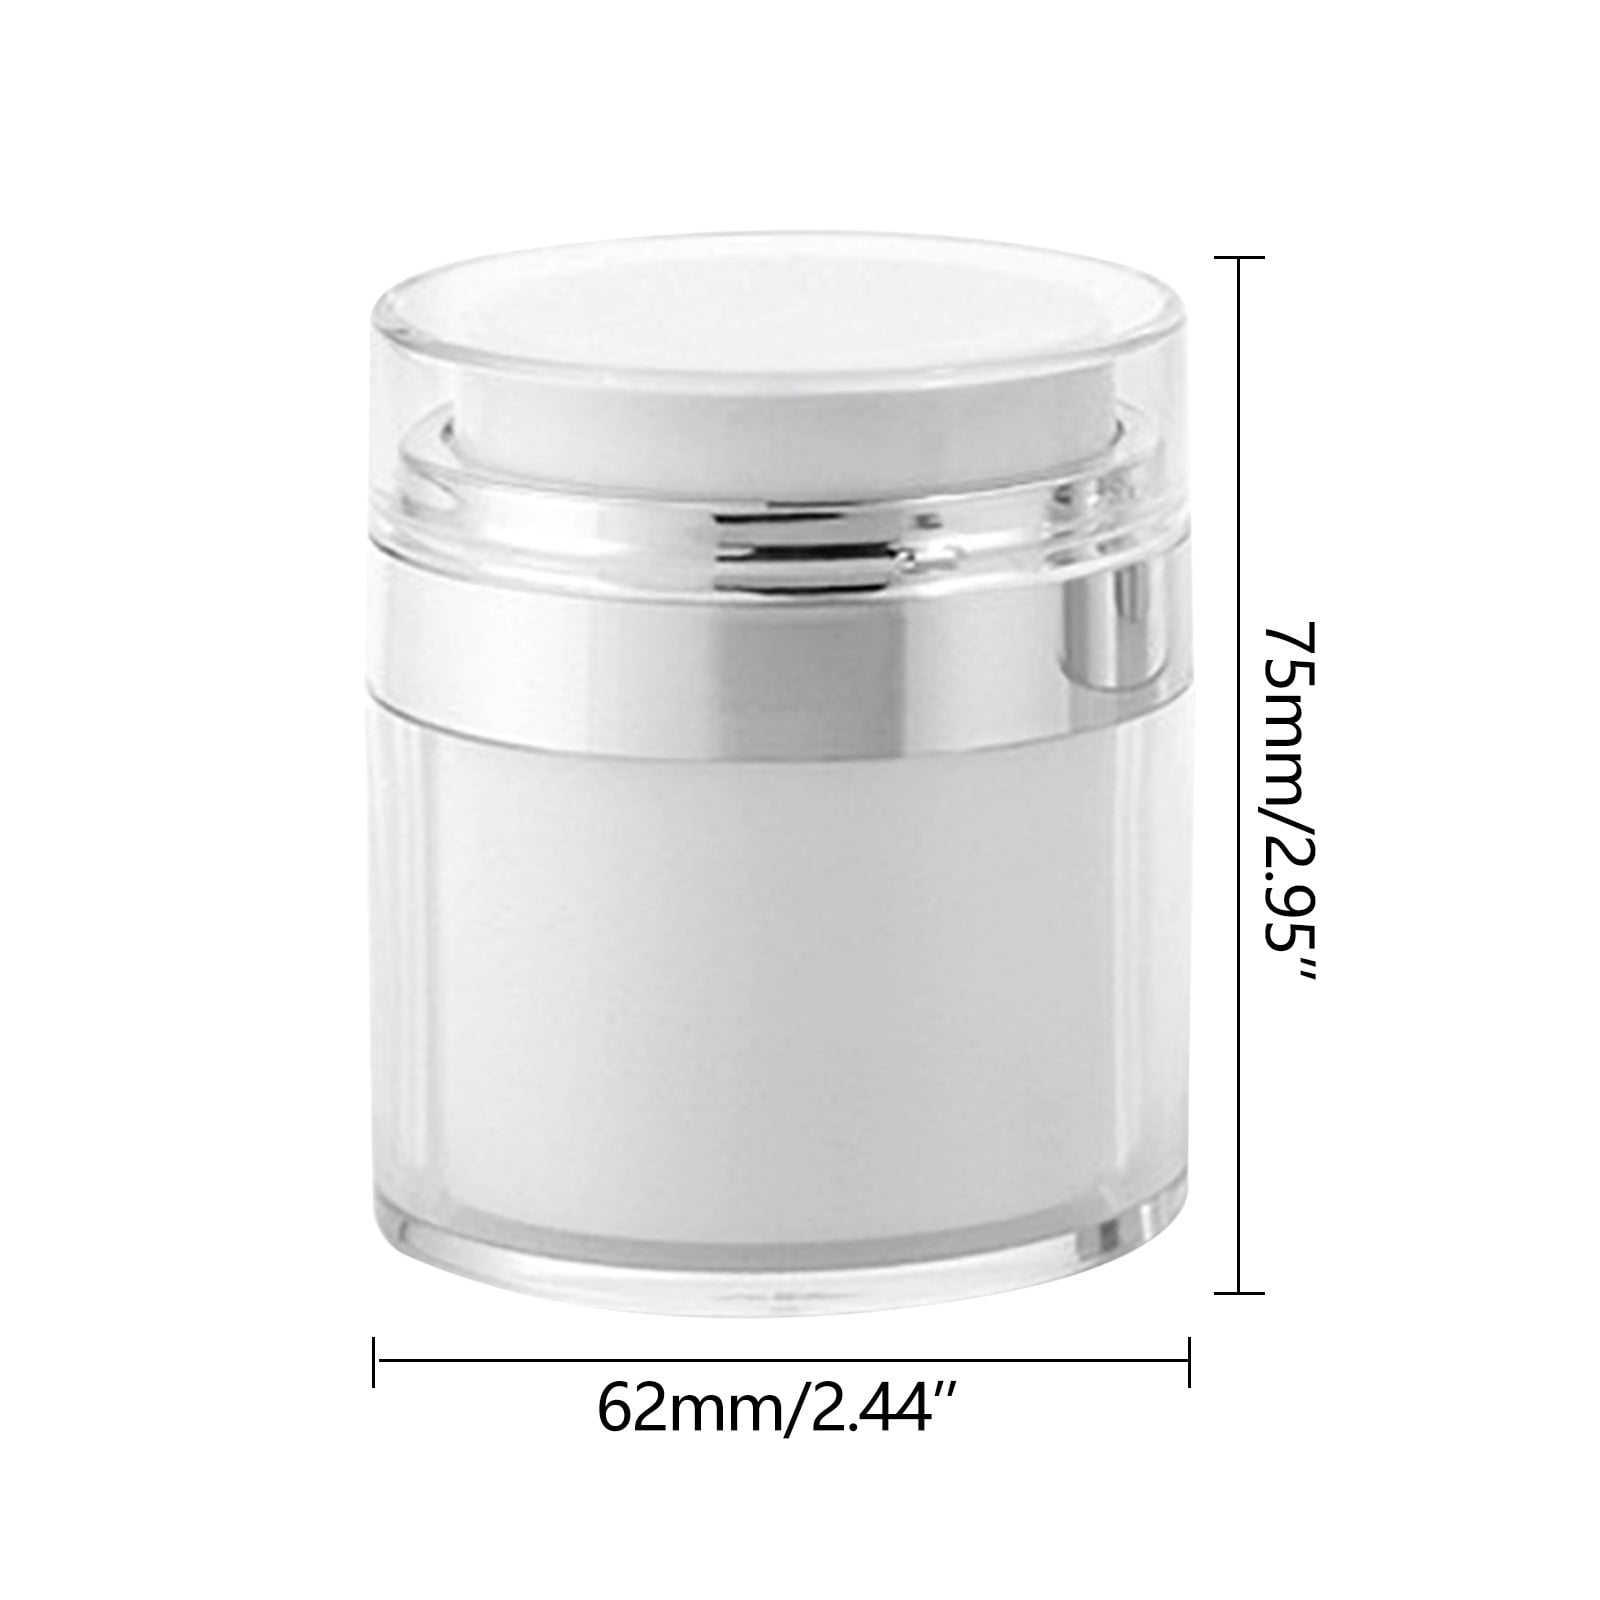 Moisturizer, Makeup Lotion Lid Pump,Travel Refillable OAVQHLG3B for Cosmetic Jar Jar Acrylic Jars,Empty with With Cream Cosmetic Pump Thick Containers Containers,Airless